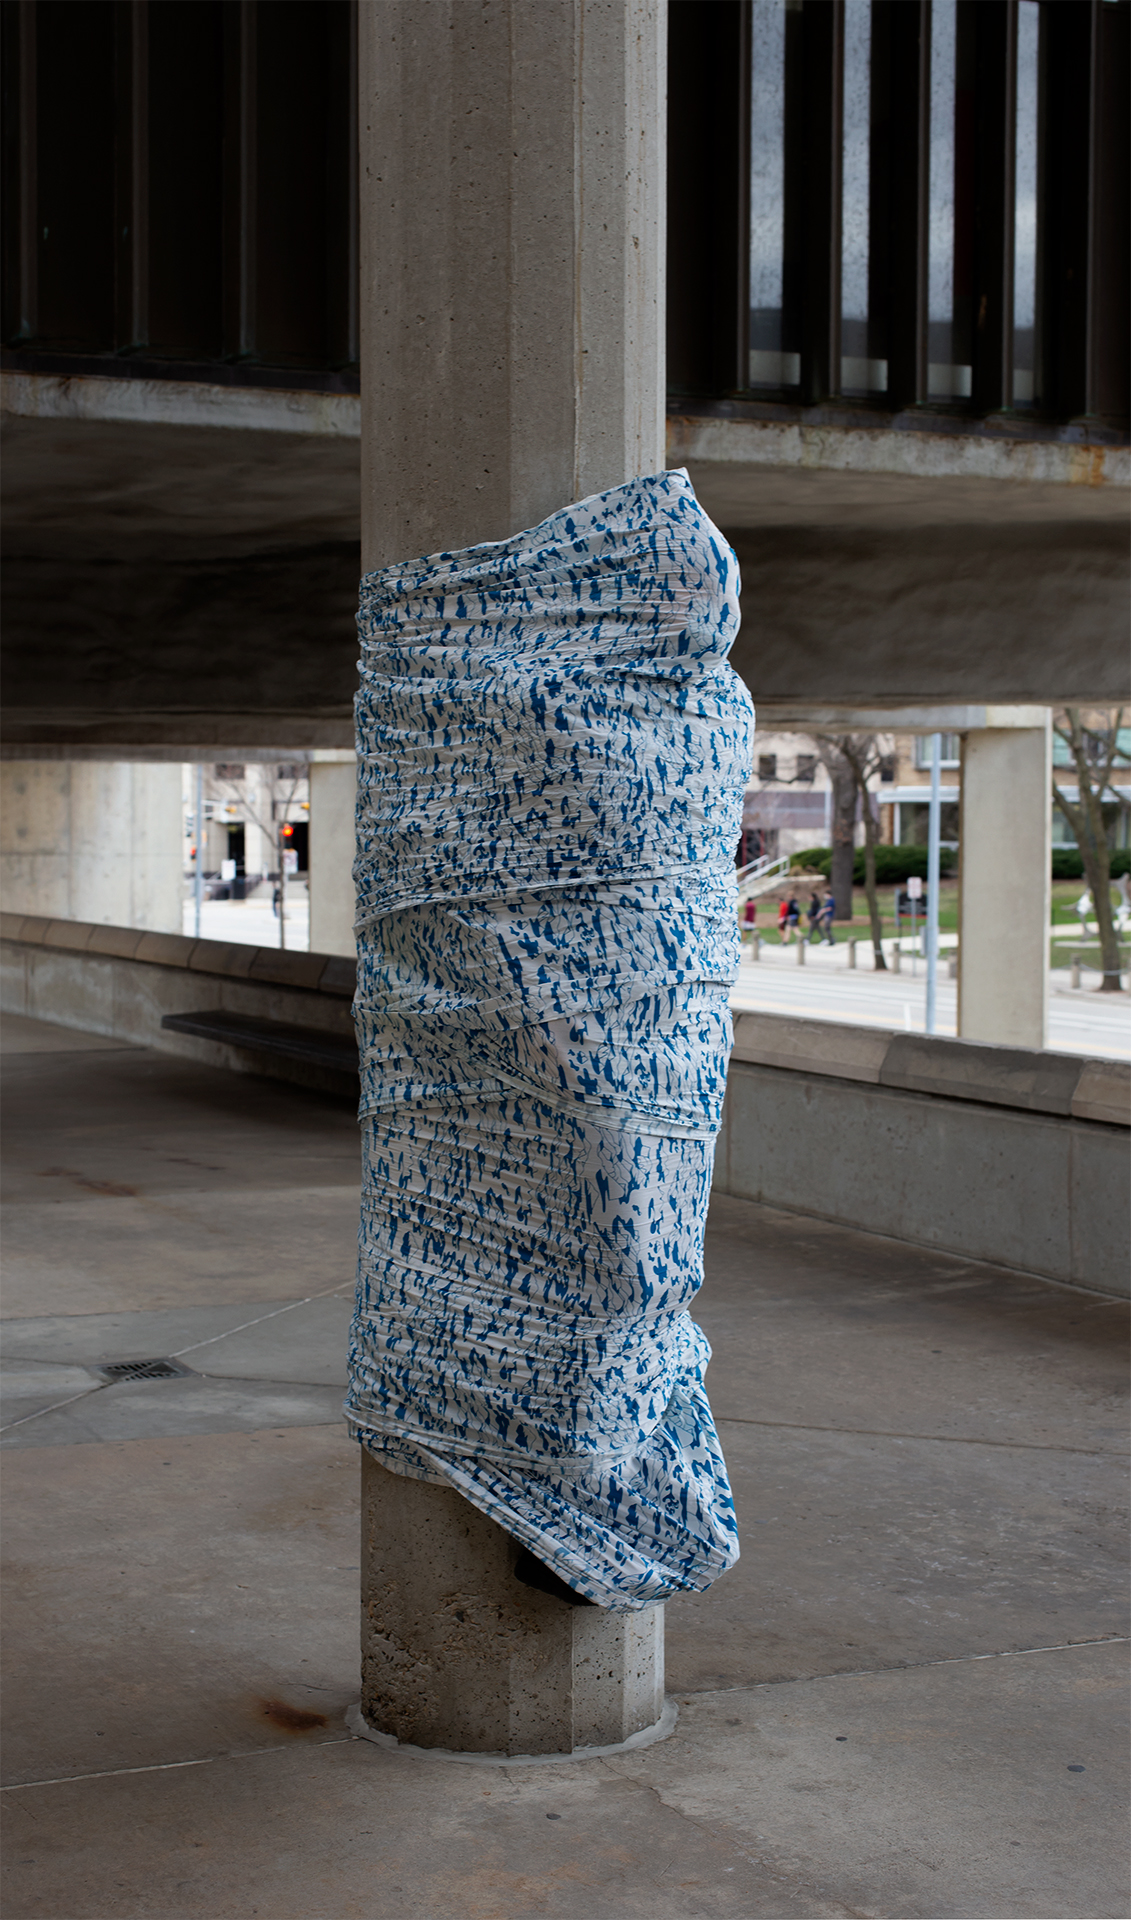 The artist is covered and bound to a column with 20 yards of screenprinted fabric as part of a performance